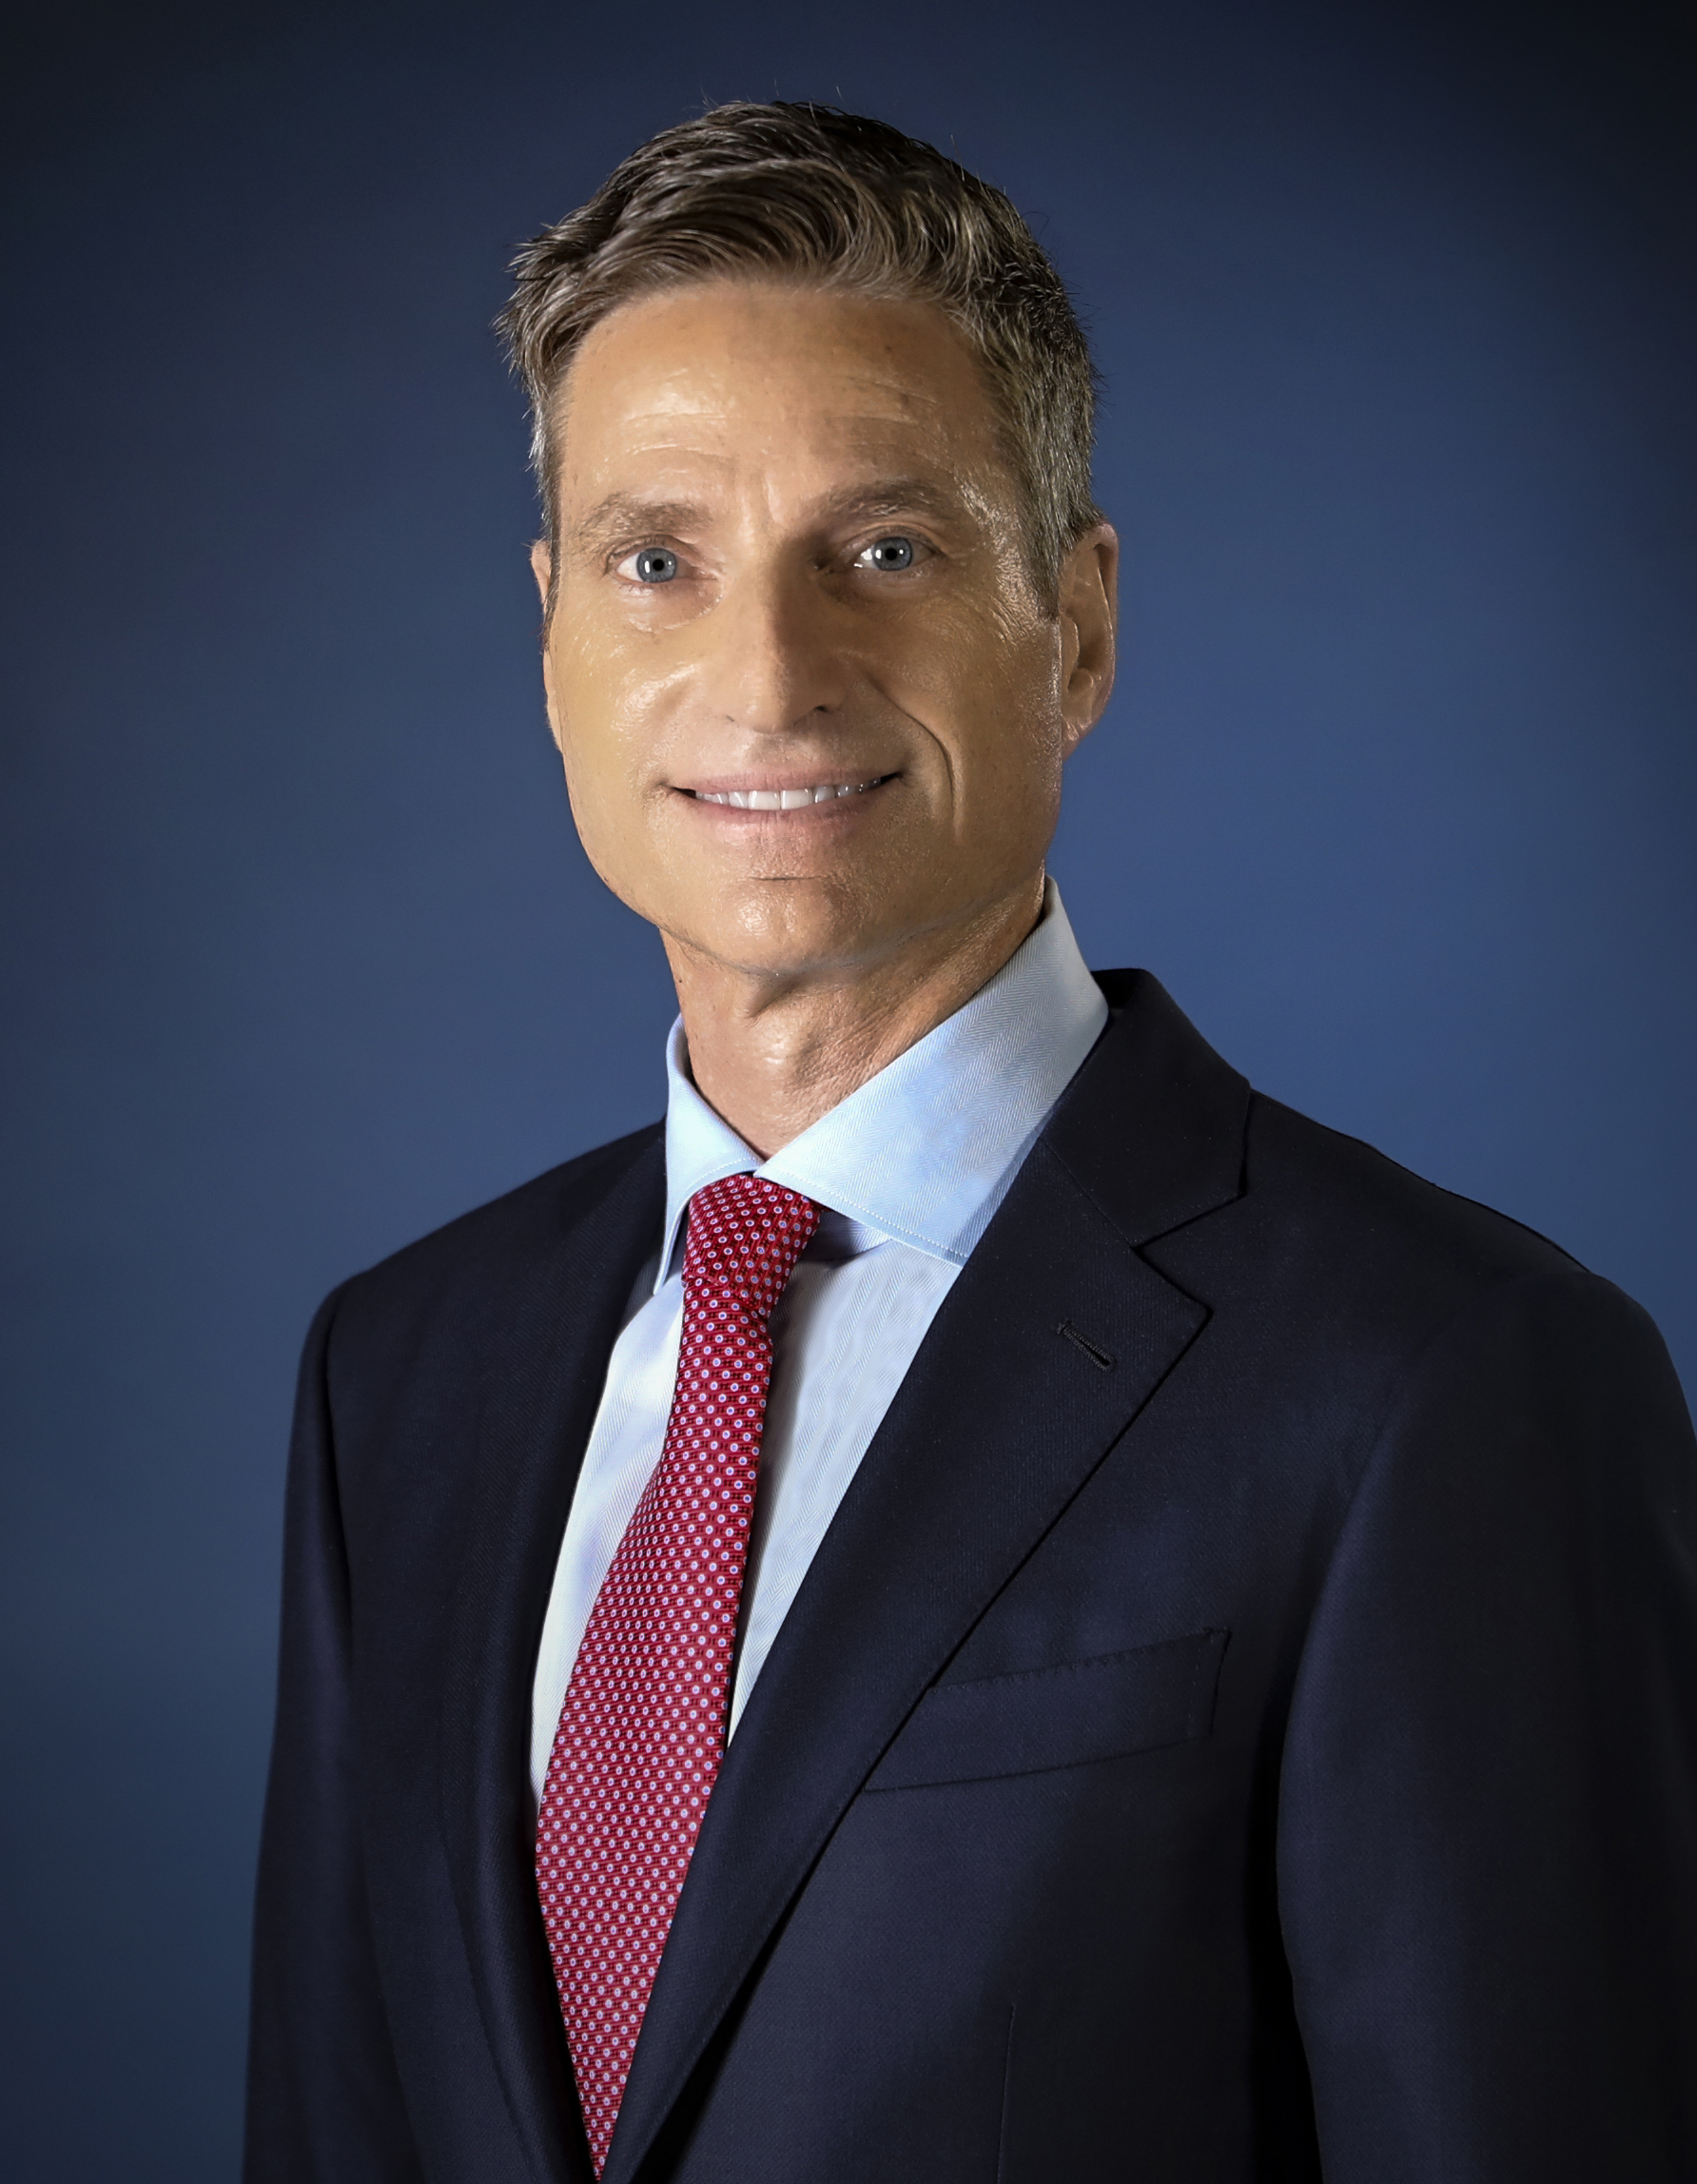 James D. Taiclet, President And Chief Executive Officer Of Lockheed Martin Corporation, To Deliver Keynote Address At Global Aerospace Summit 2020